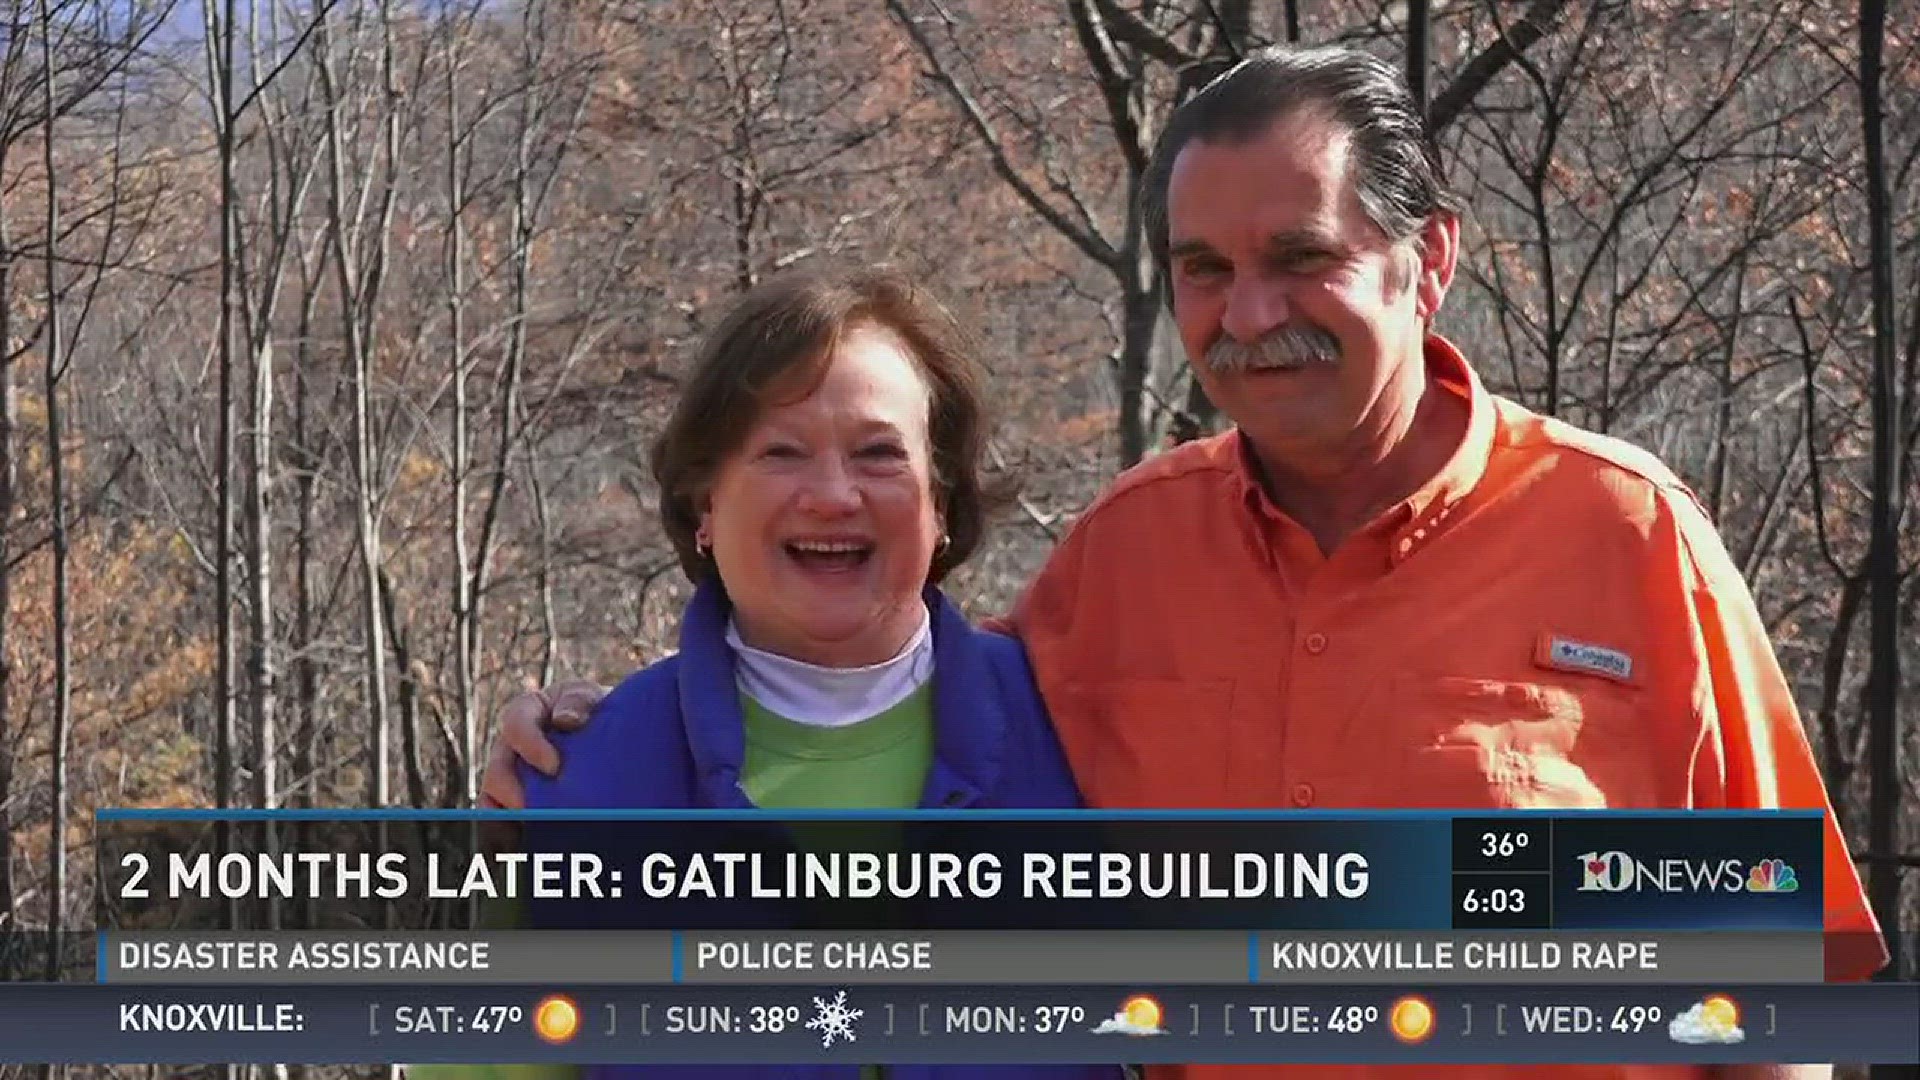 Jan. 27, 2017: It's been two months since Pete and Joy Jucker learned wildfires destroyed their Sevier County home. They are continuing to rebuild their home and encourage others to do the same.